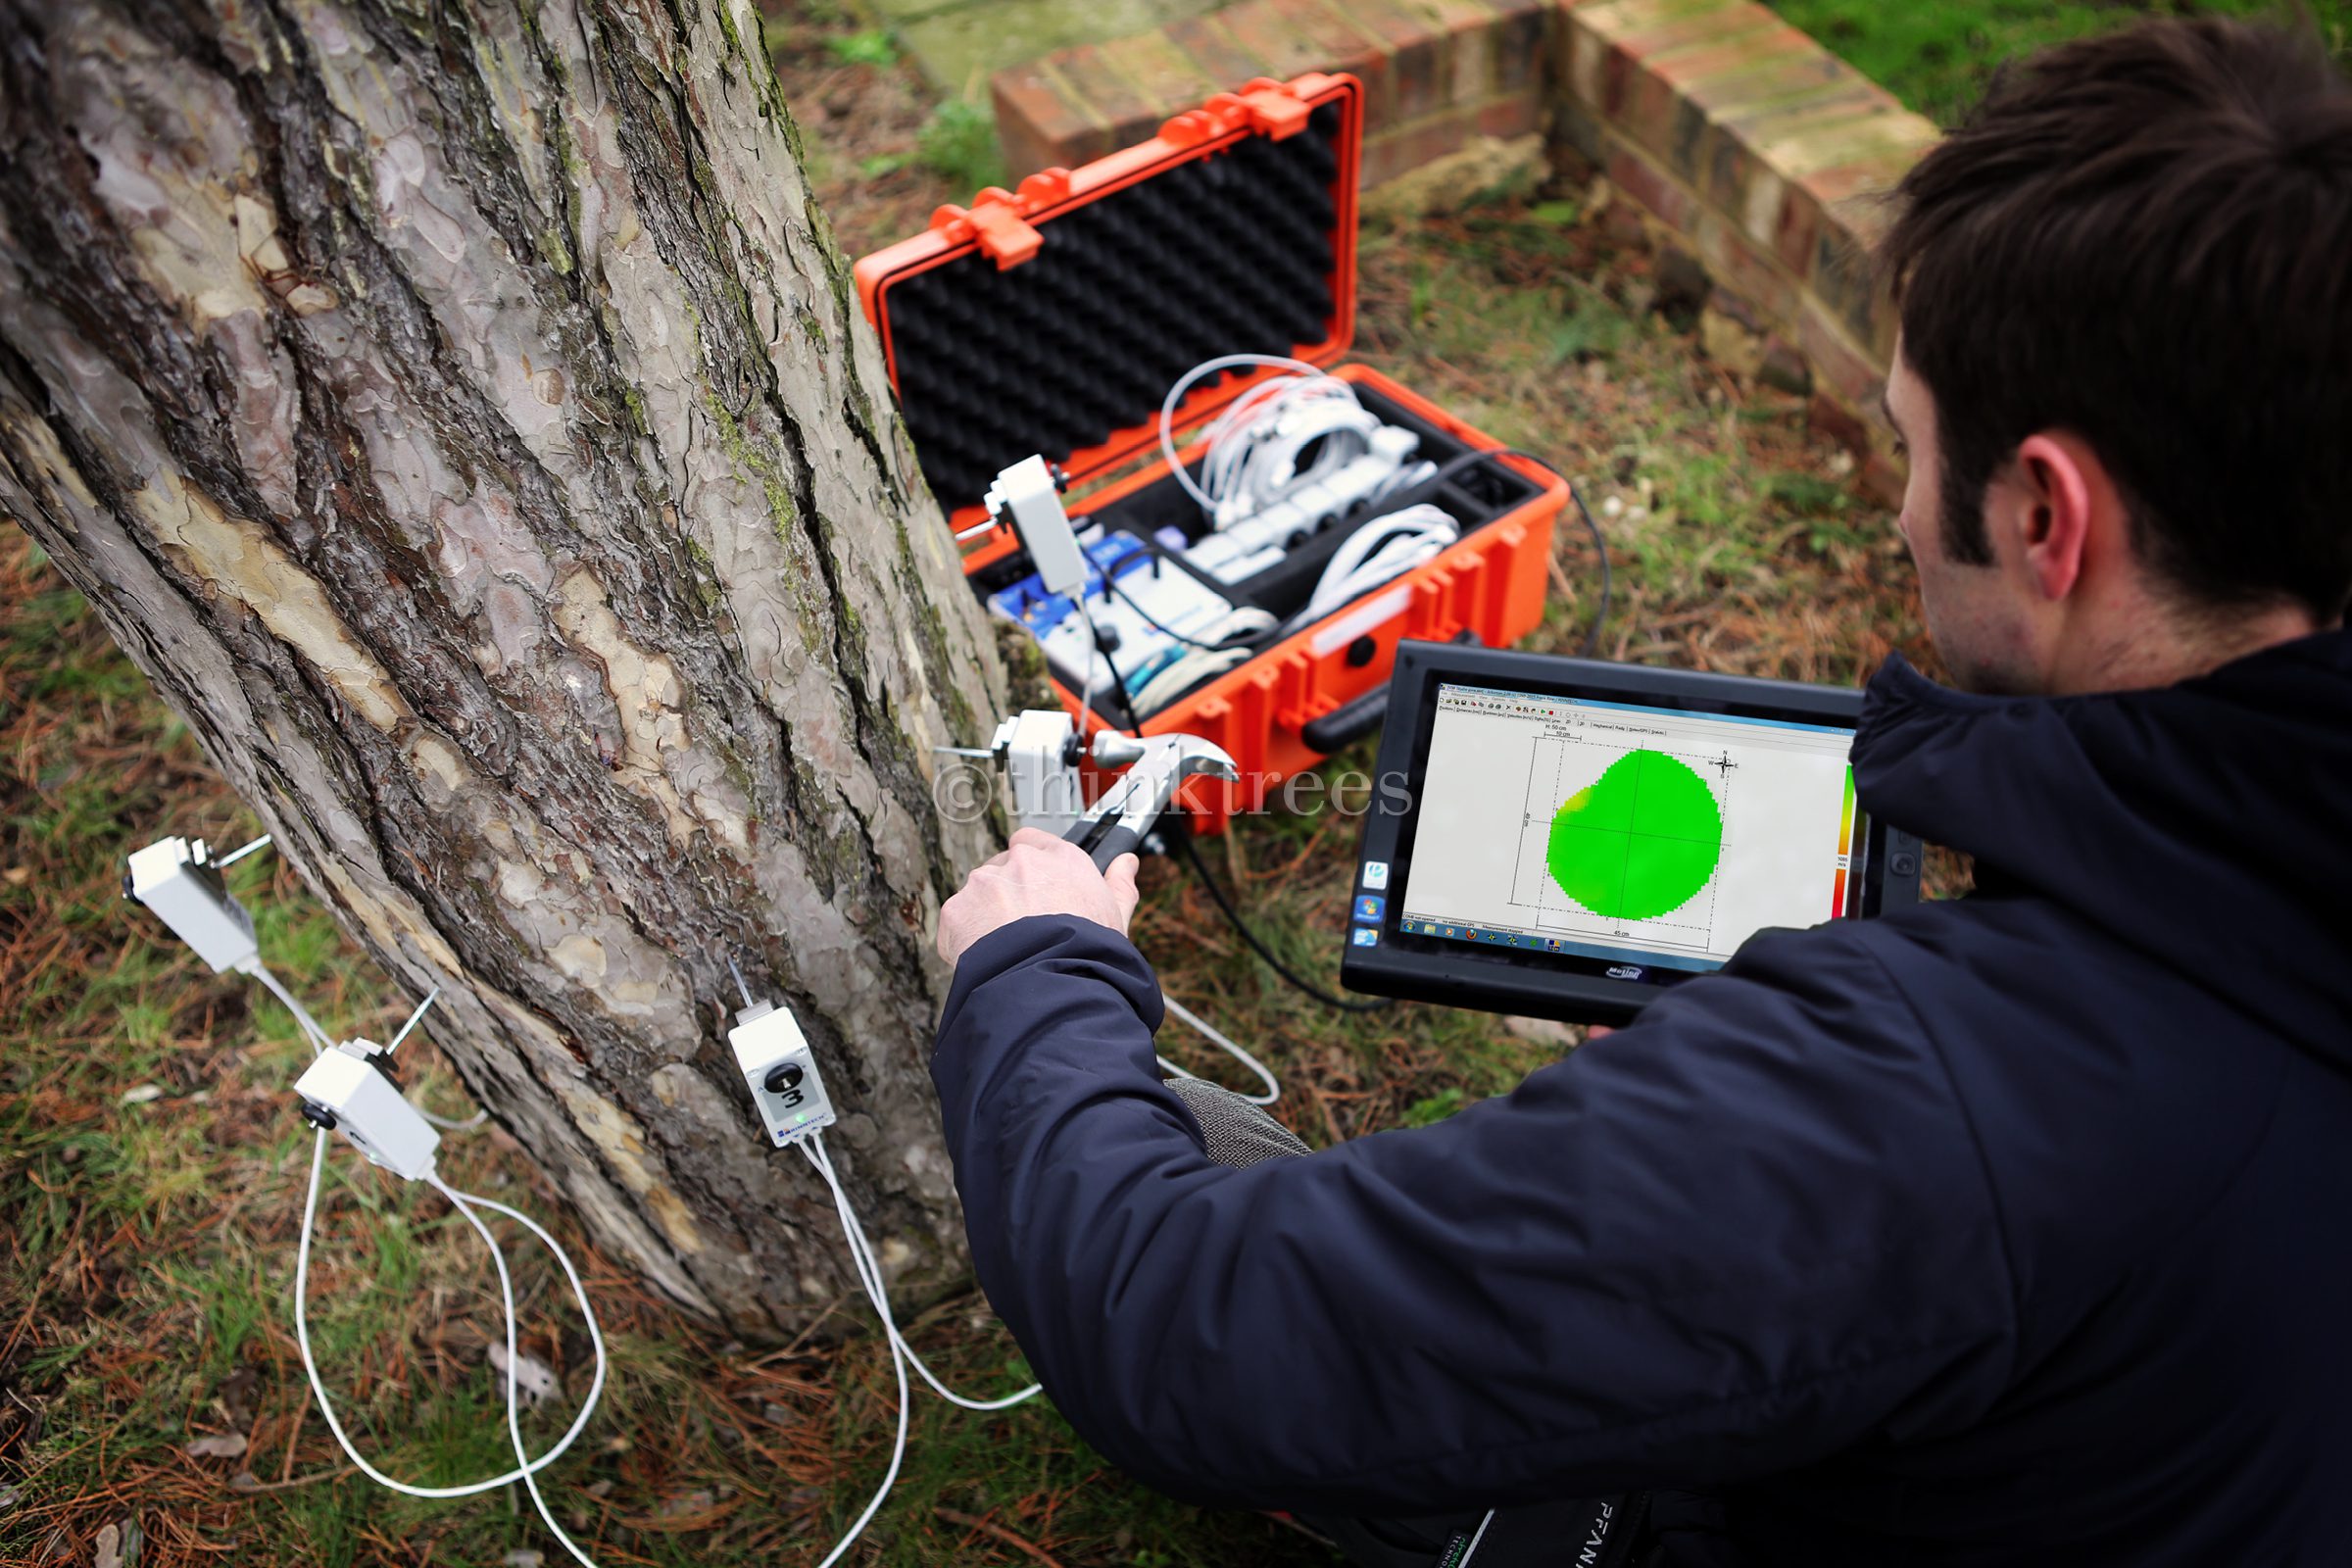 Tree expert testing a pine tree for decay using an arbotom impulse tomography unit